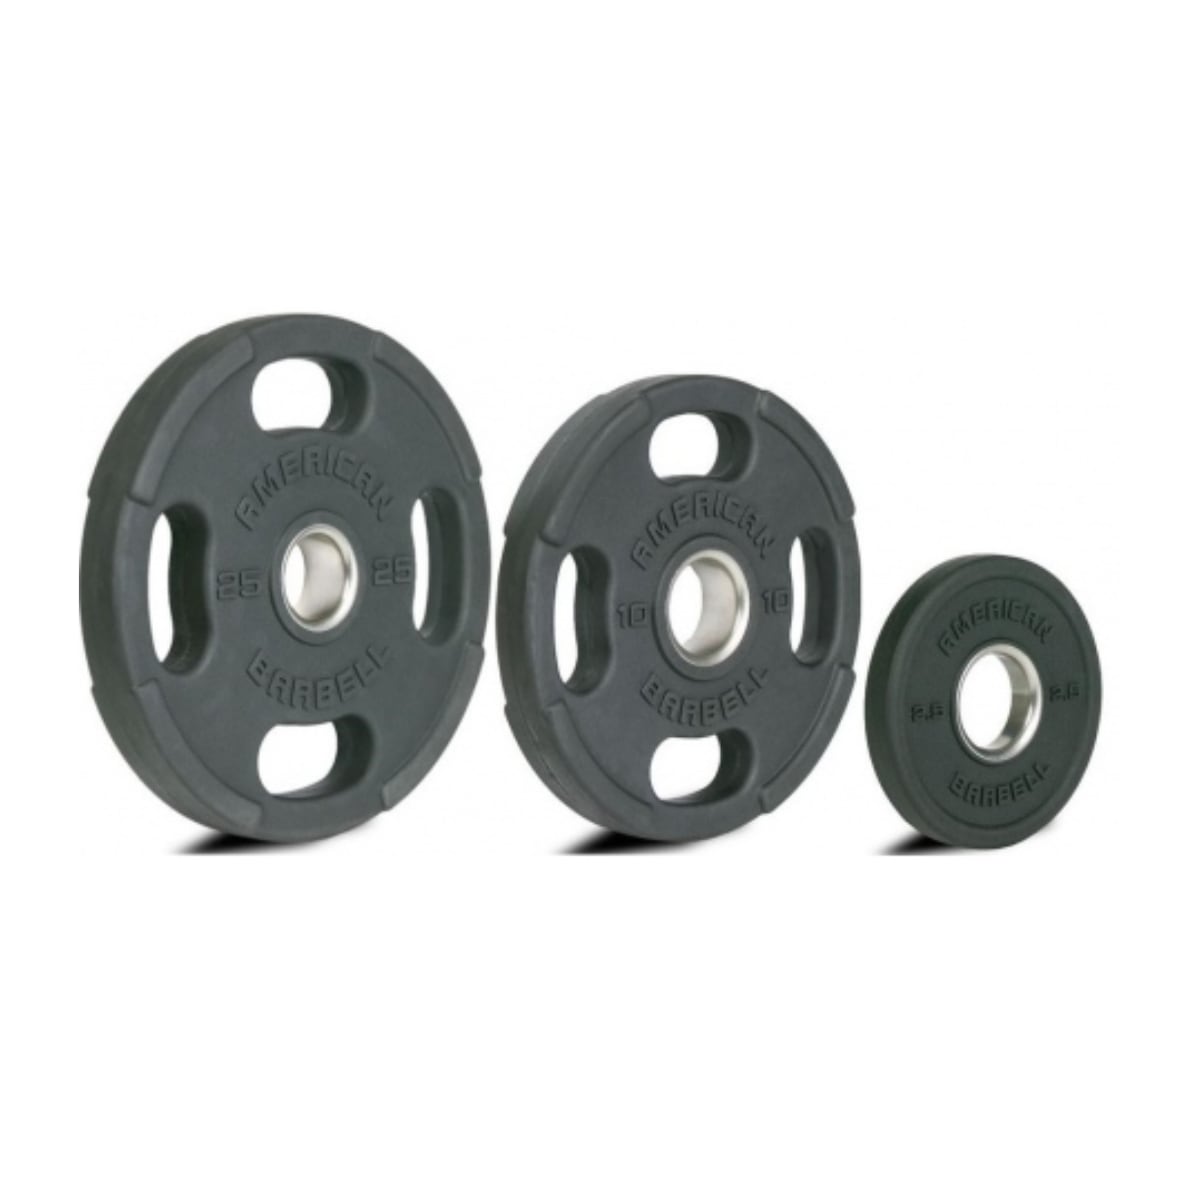 American Barbell Olympic Rubber Plate 2,5 kg